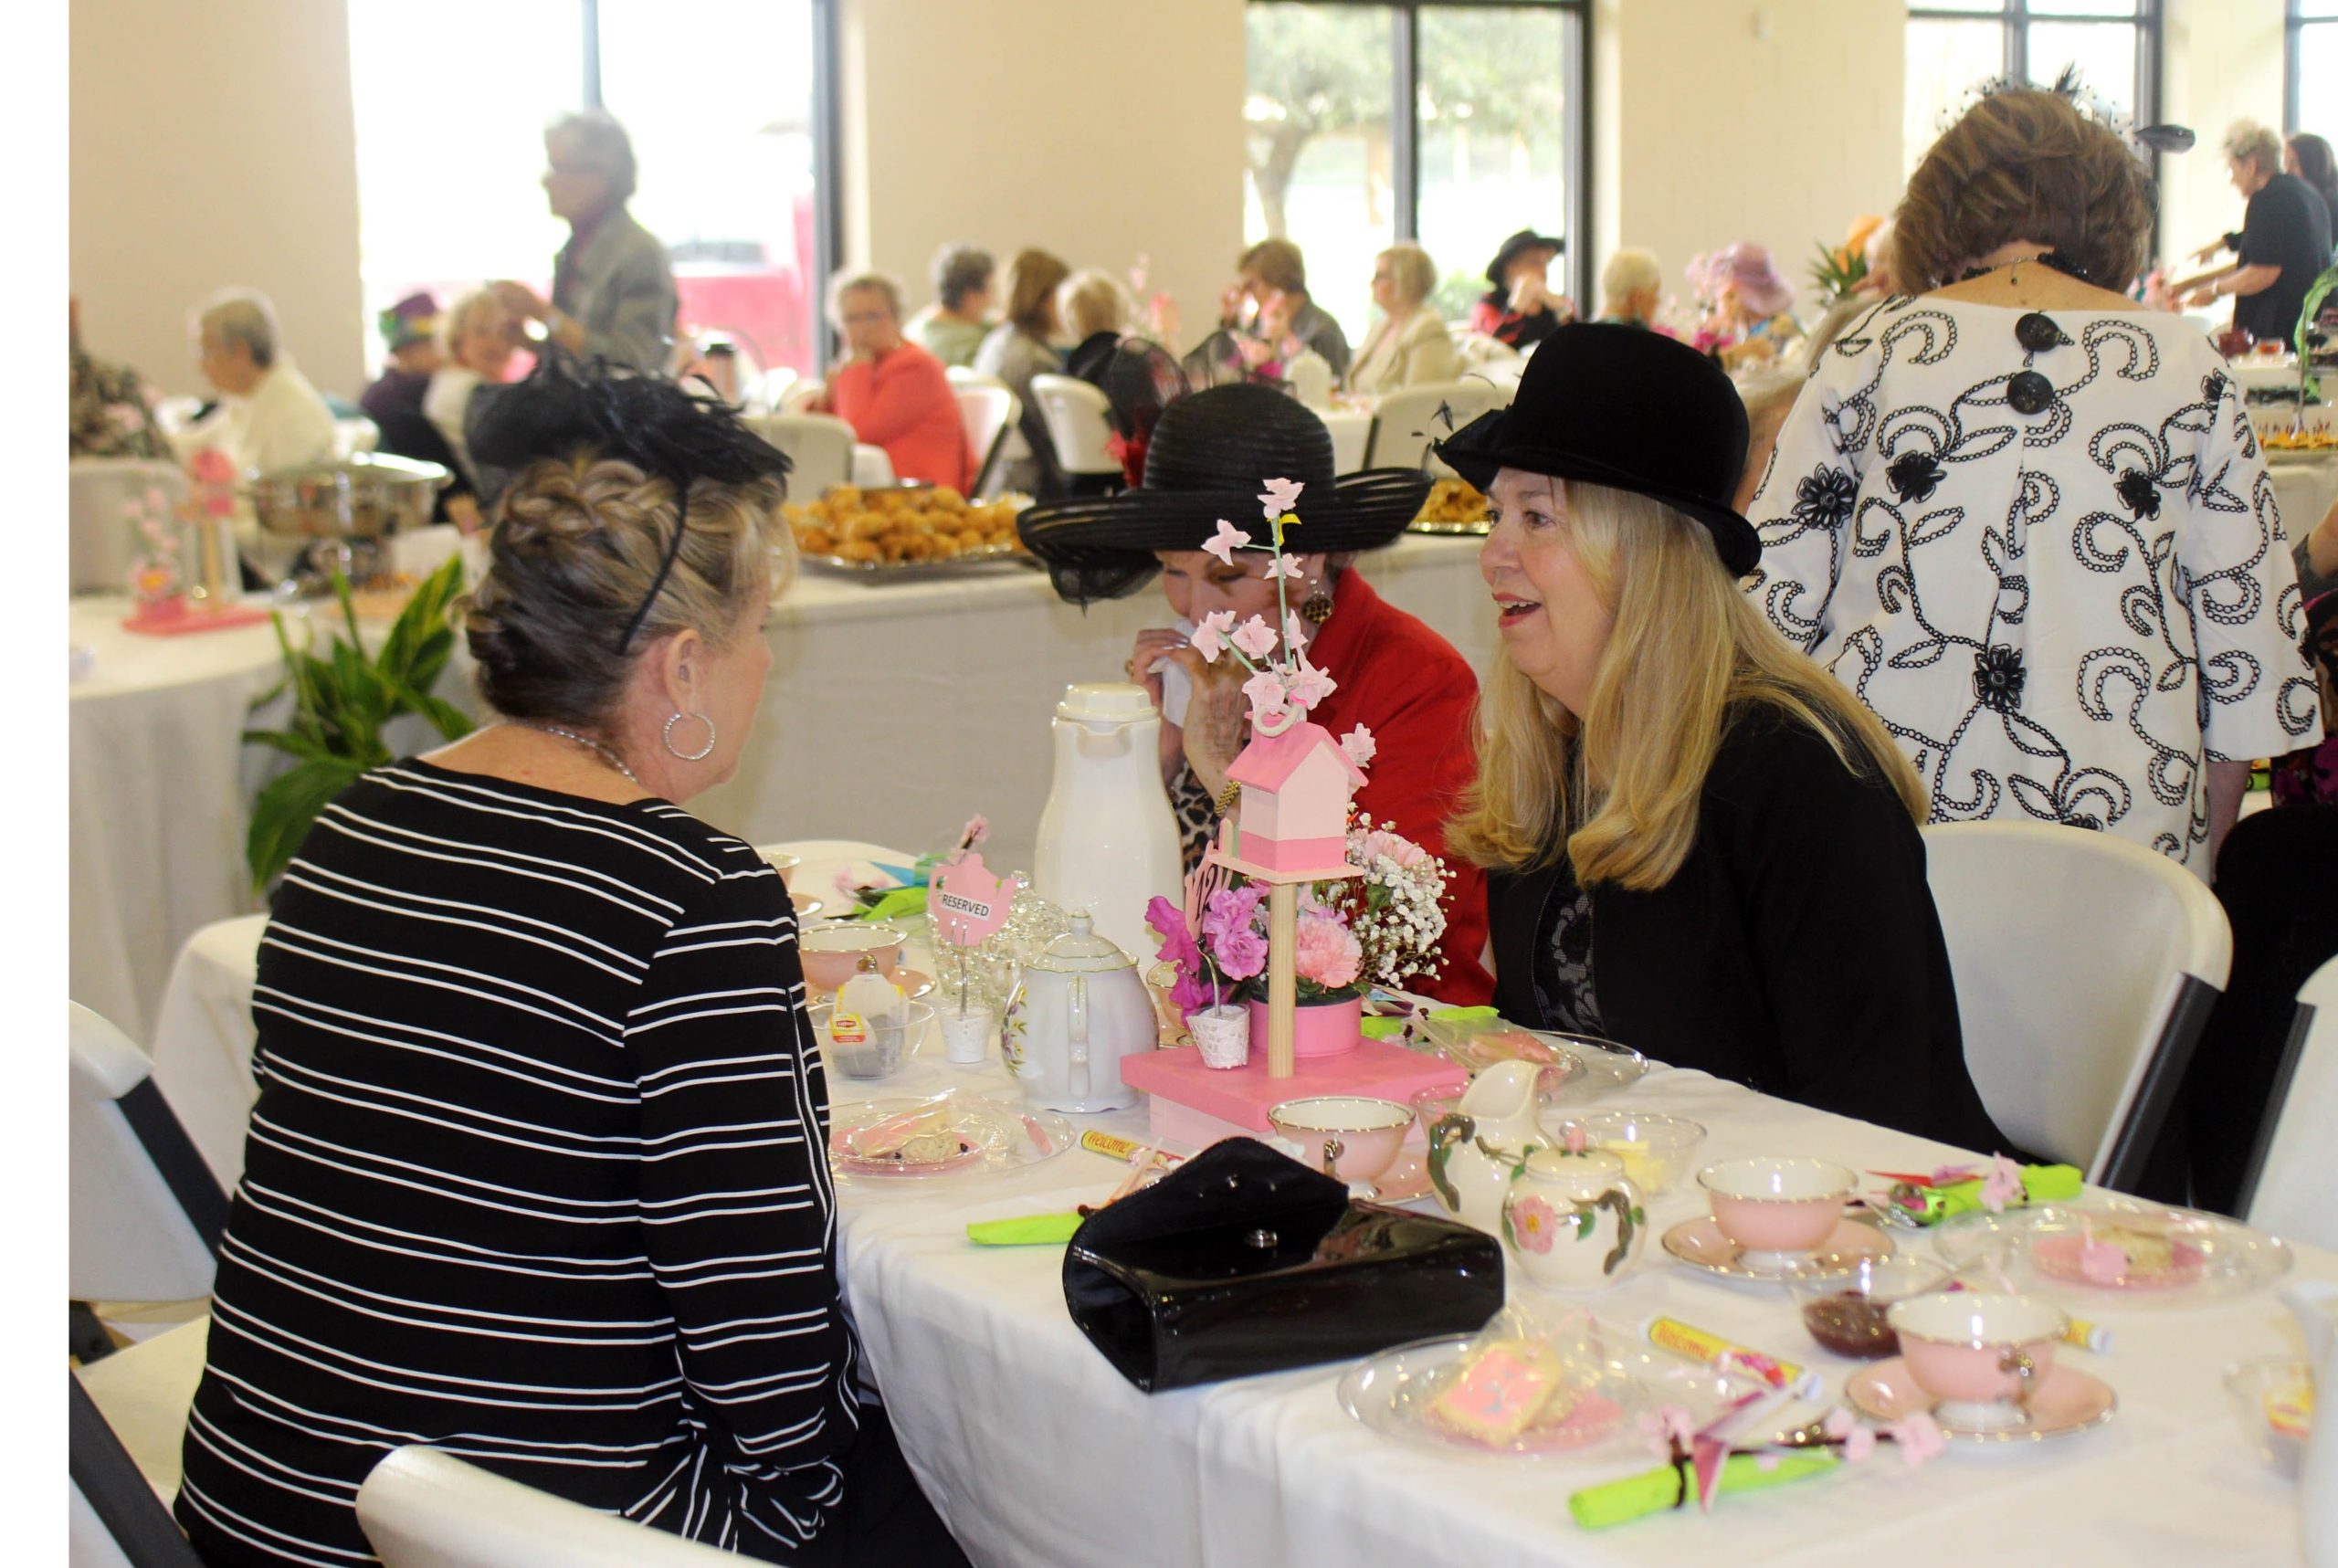 The Azalea Garden Club held their annual Elegant Spring Tea & Auction at the Pace Community Center. The event is the only fundraiser the club has for the year. [Ramon Rios/SRPG]